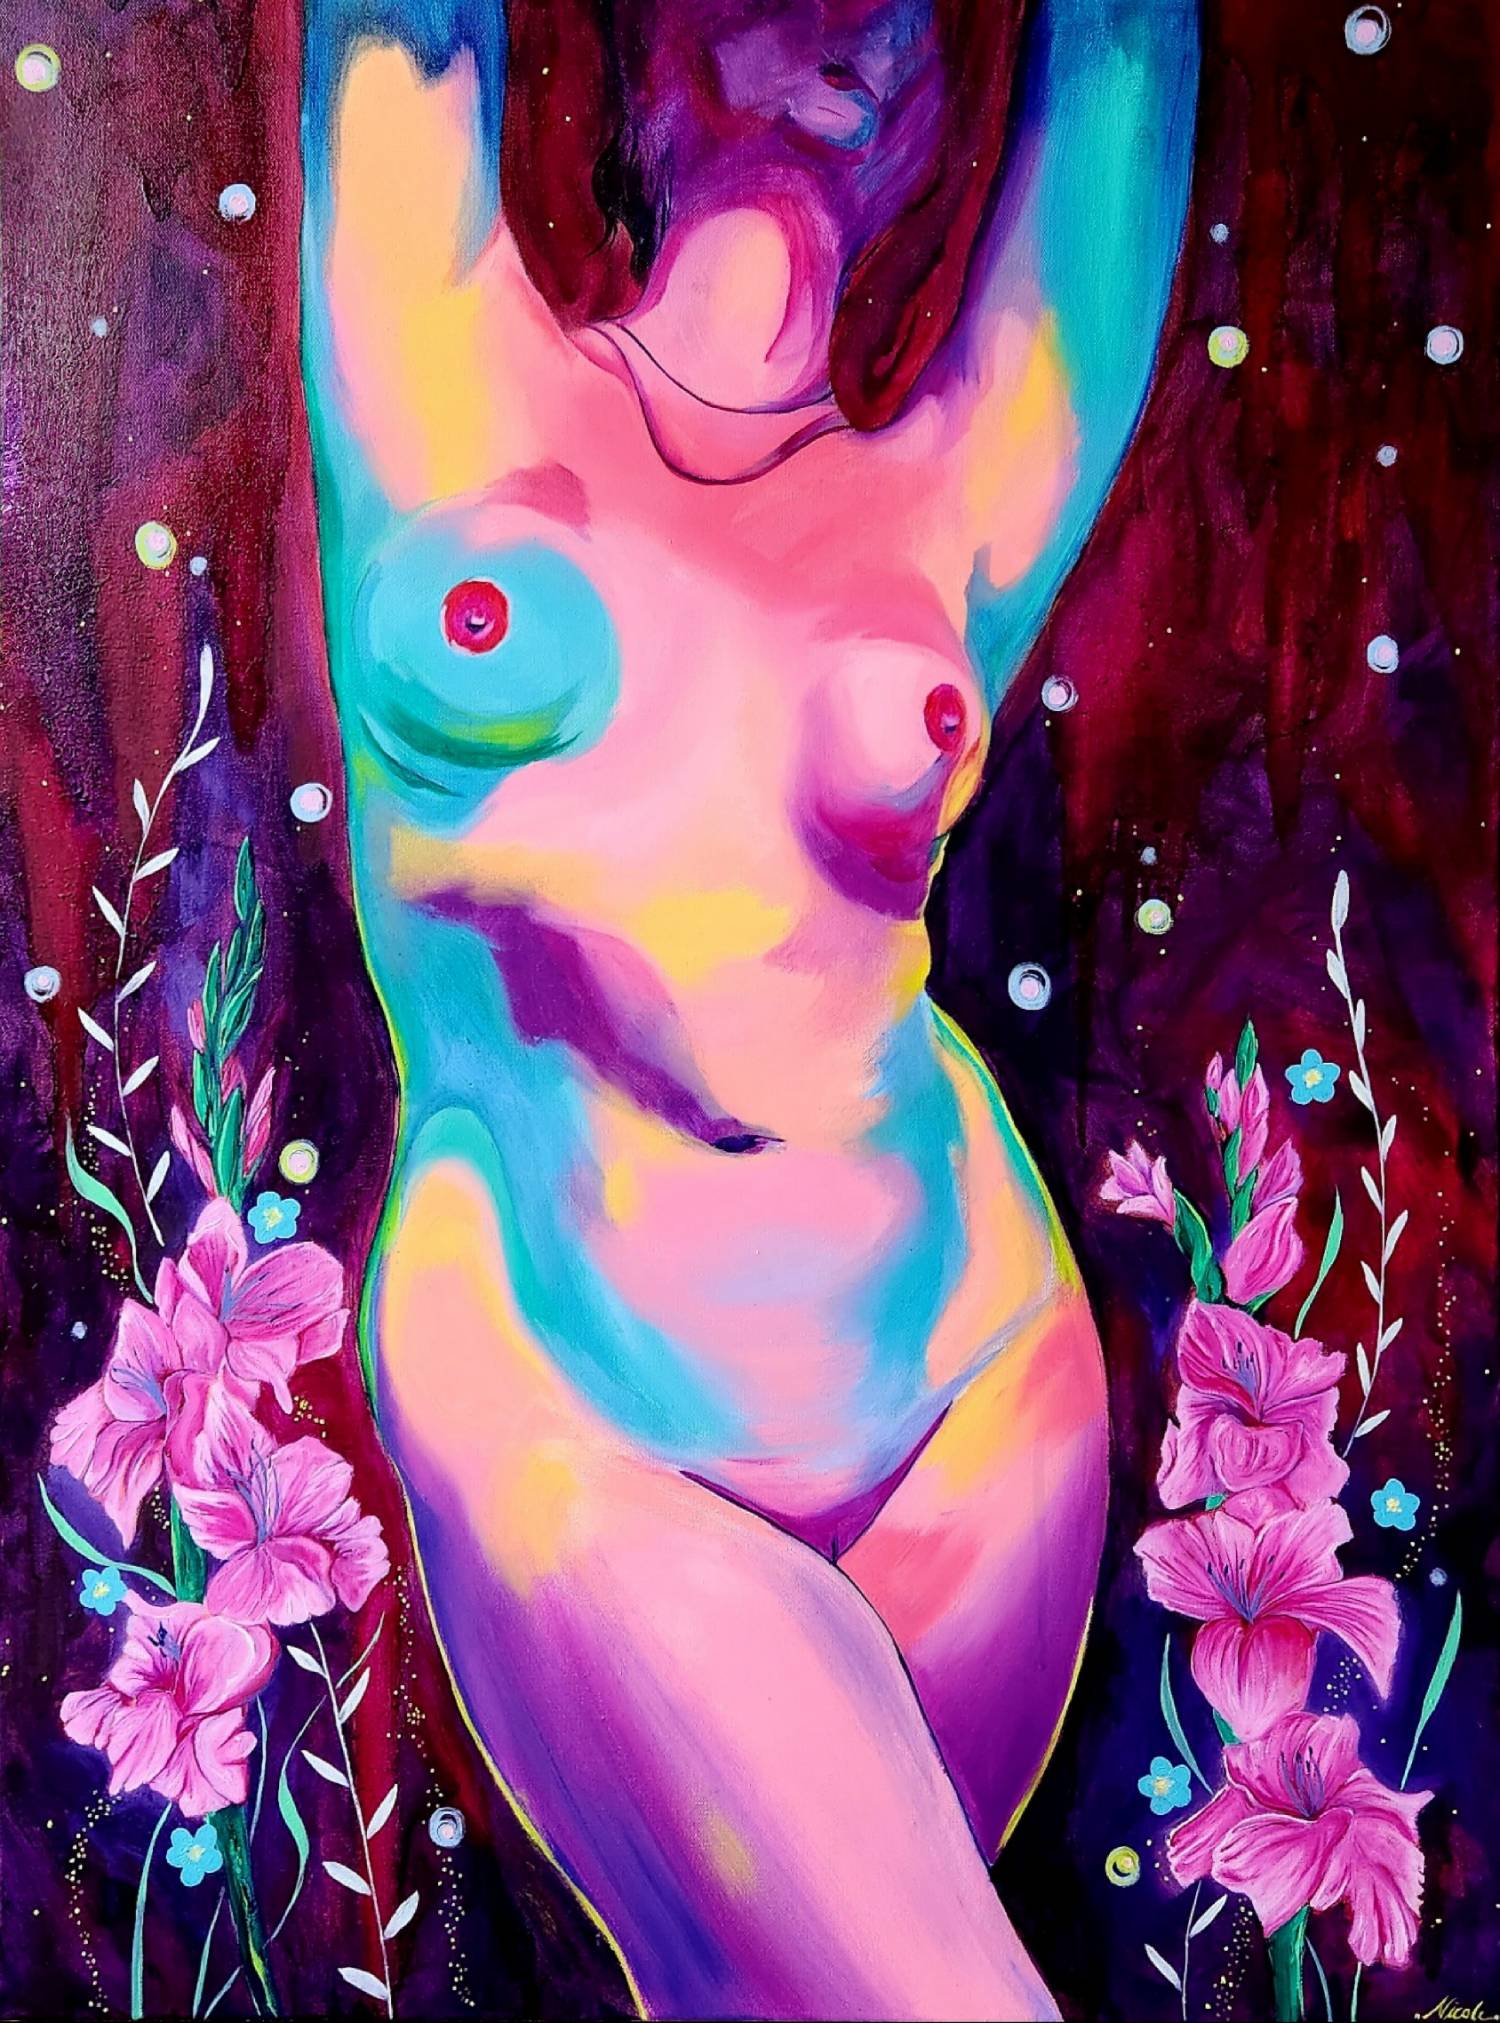 Artist Nicole Marie Hagg's piece, “Death or Gladioli,” which shows a nude woman's figure with here arms up, surrounded by gladiolus flowers.